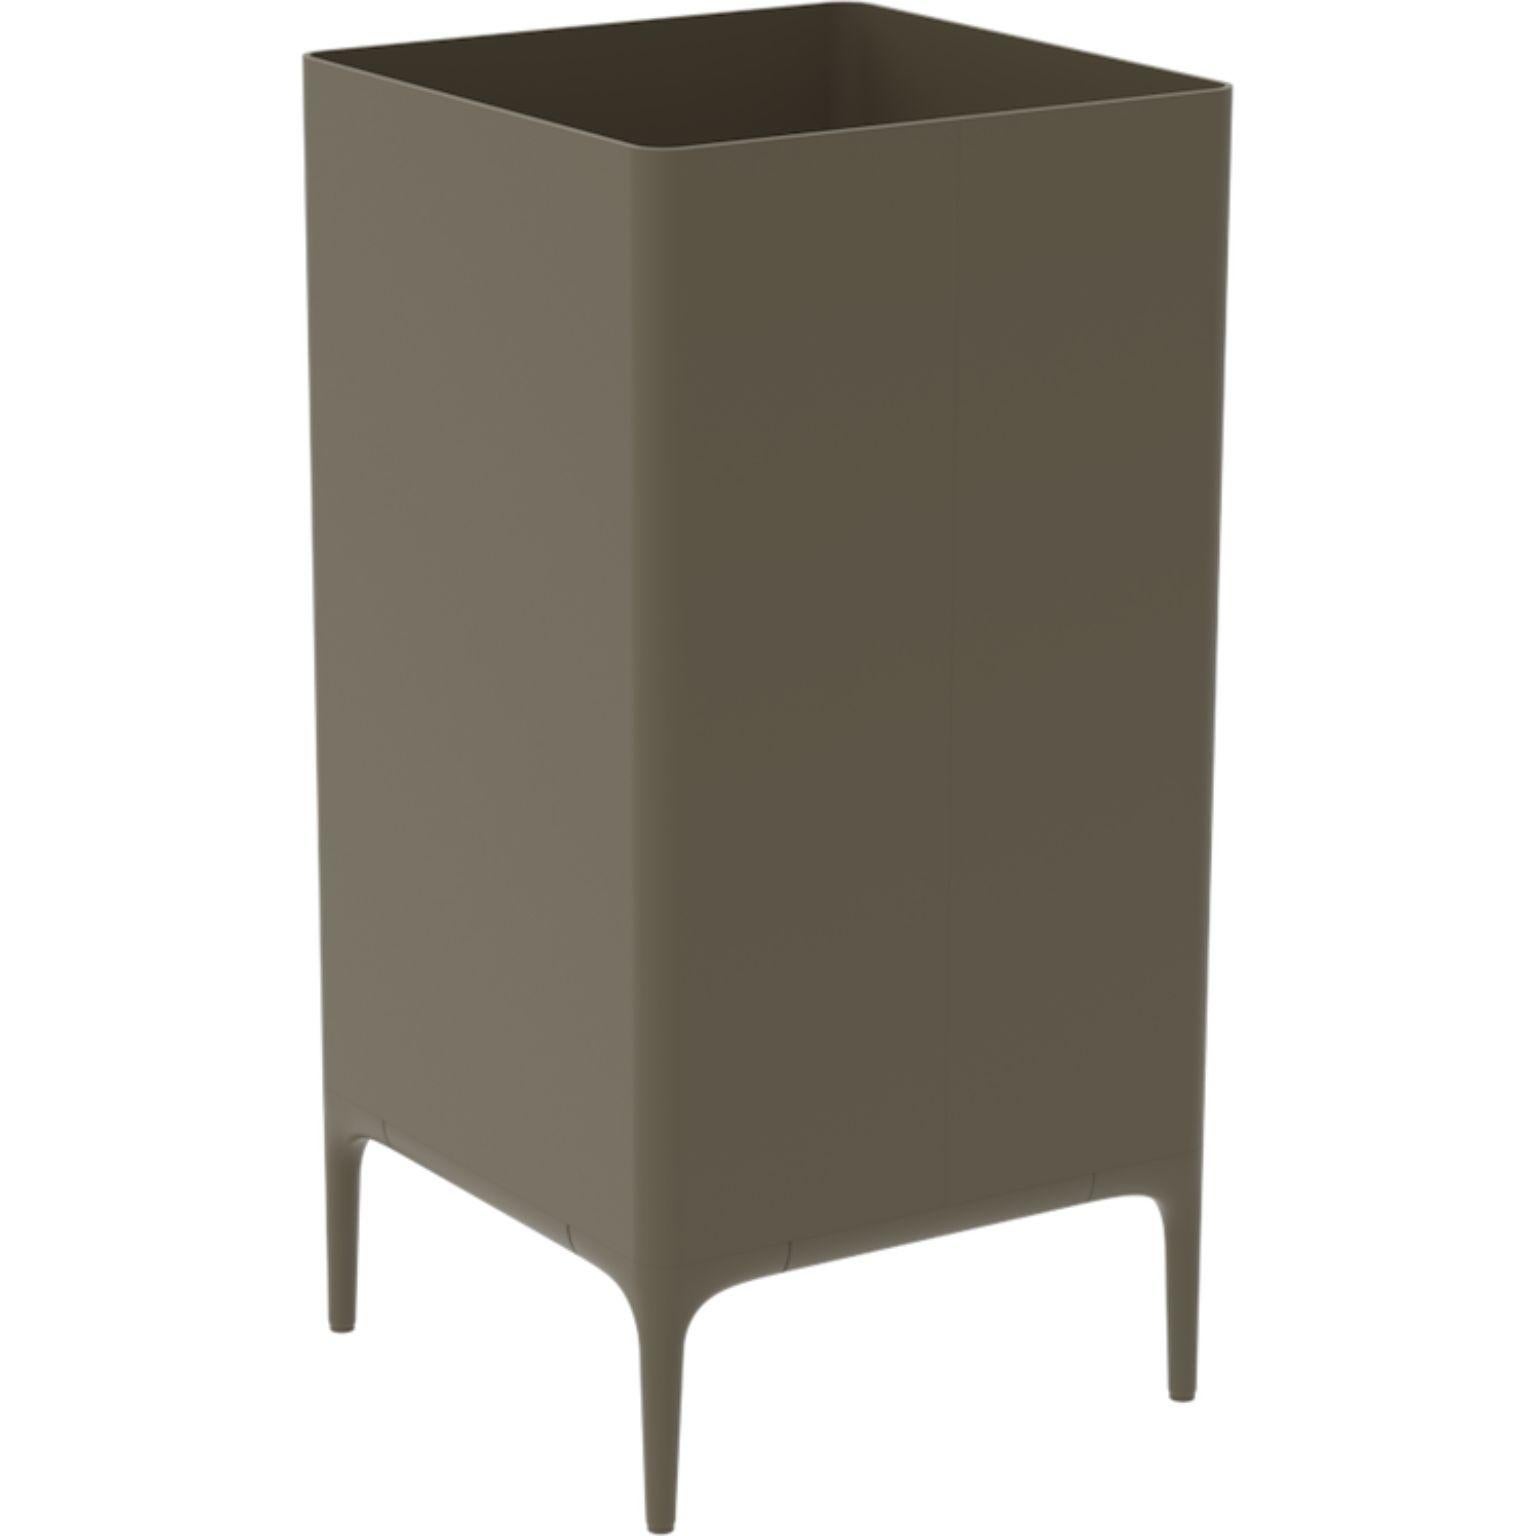 Xaloc Bronze 95 Pot by MOWEE
Dimensions: D45 x W45 x H90 cm
Material: Aluminium
Weight: 12 kg
Also Available in different colours and finishes. 

 Xaloc synthesizes the lines of interior furniture to extrapolate to the exterior, creating an